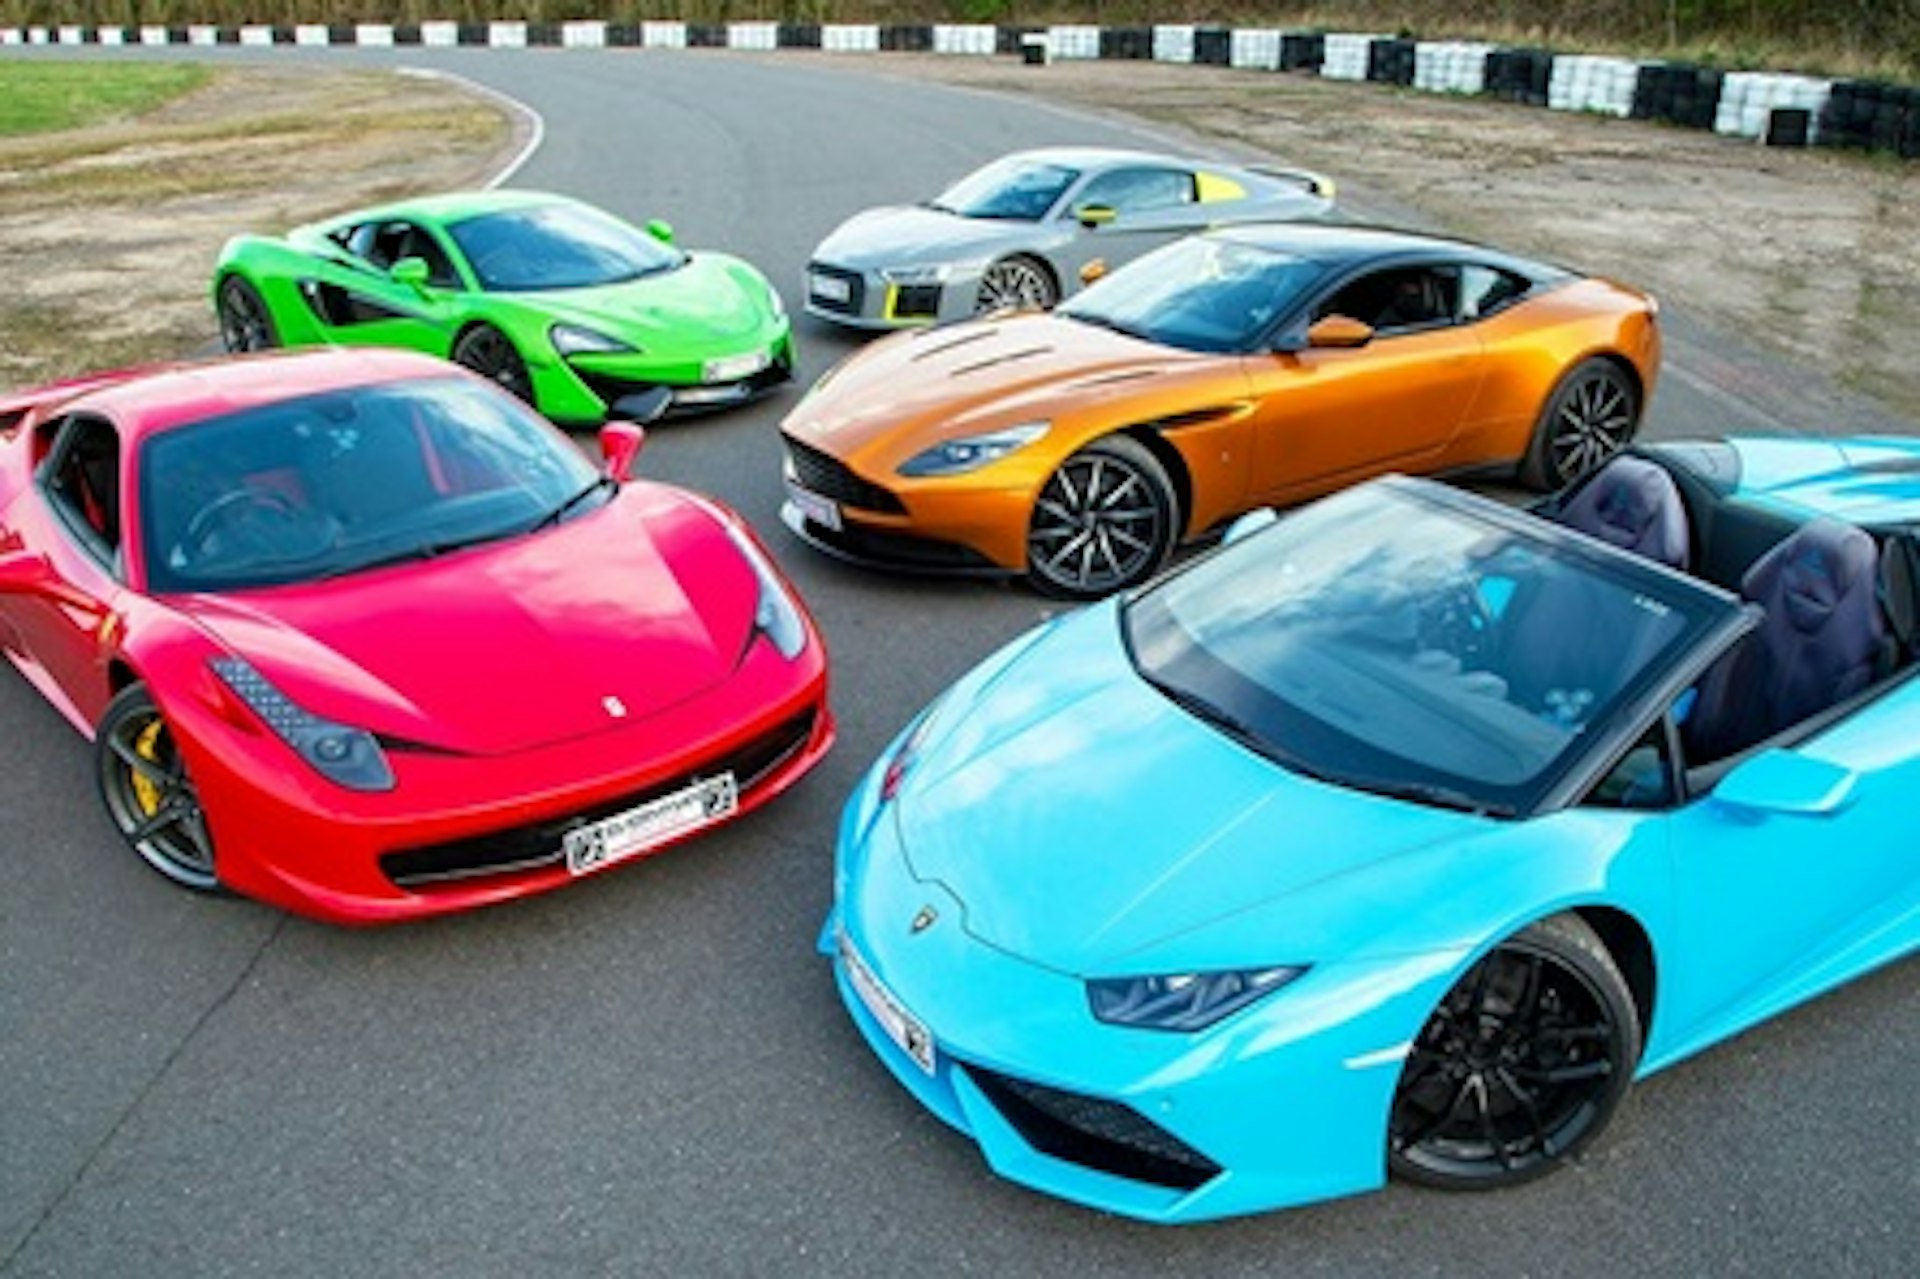 Ultimate Ten Supercar Track Day with Demo Lap, High Speed Passenger Ride and Lunch 1